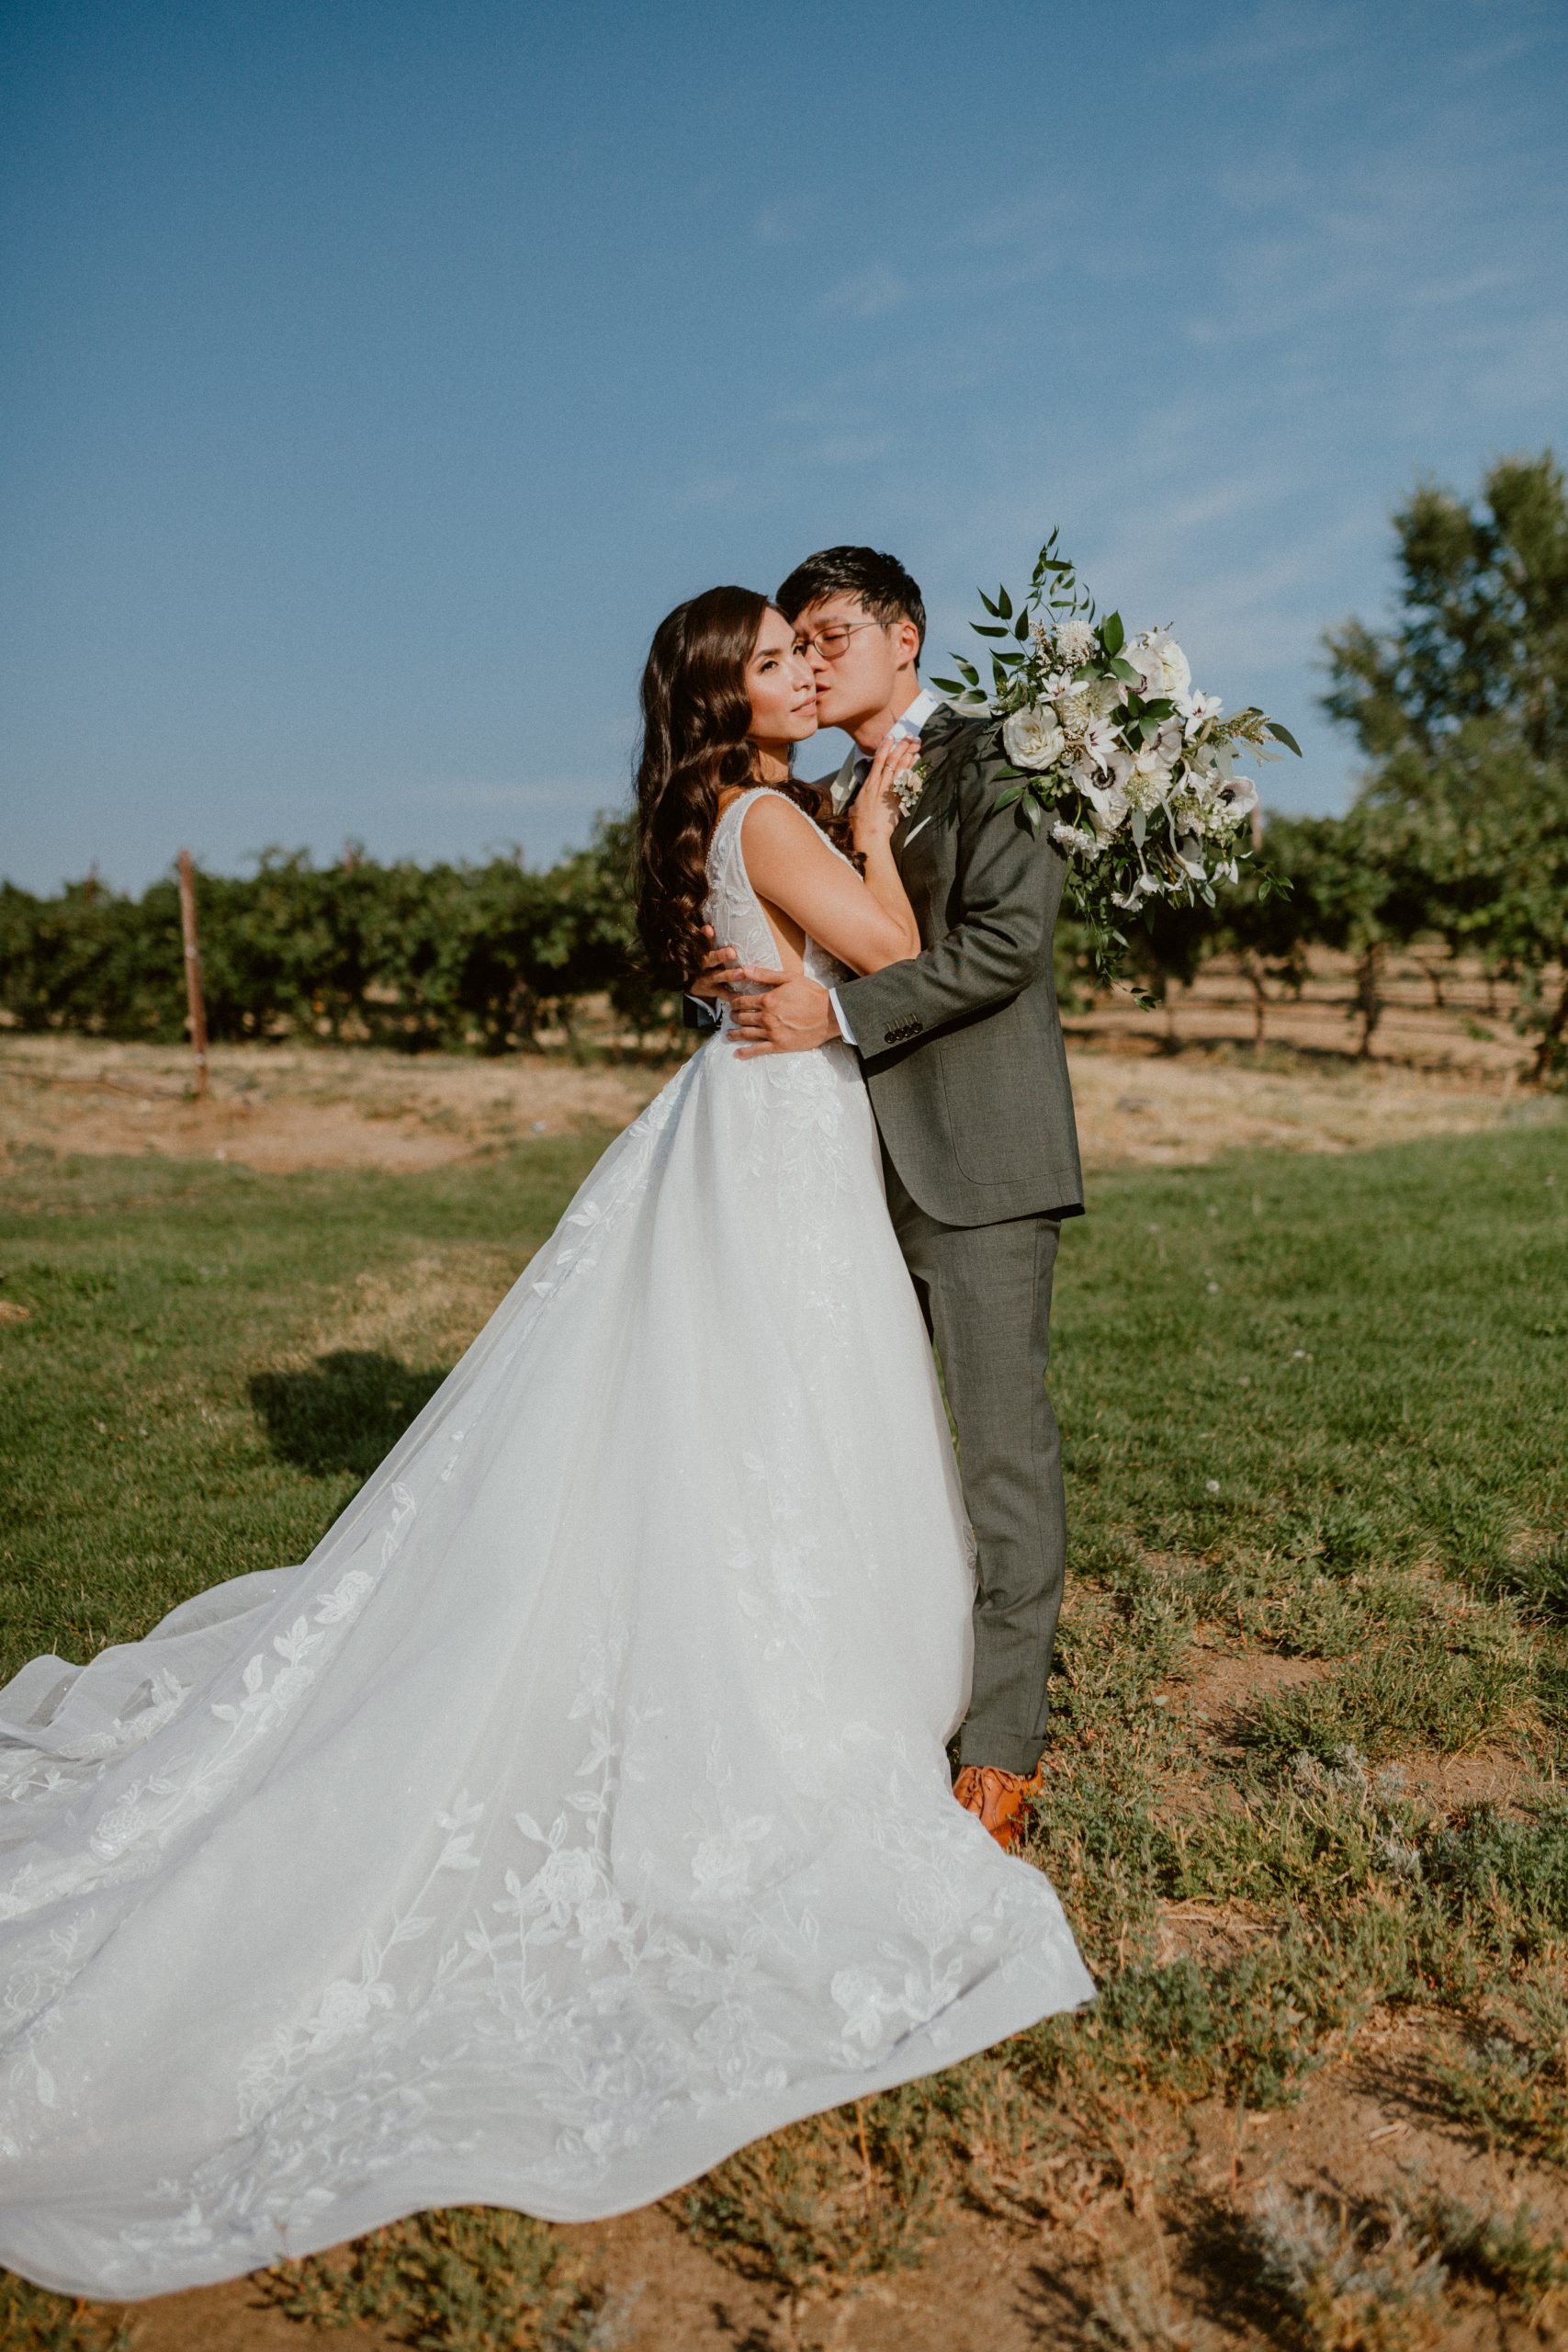 Fall winery elopement style with bride and groom pre-wedding ceremony, newlywed couple inspiration wedding day photography | Washington Elopement, Destination Elopement Photographer, Cave B Inn Elopement Inspiration, Washington Elopement ideas, PNW Fall Wedding Inspiration, Fall Outdoor Wedding Ideas,Fall Wedding Inspiration, PNW Outdoor Wedding Ideas | chelseaabril.com